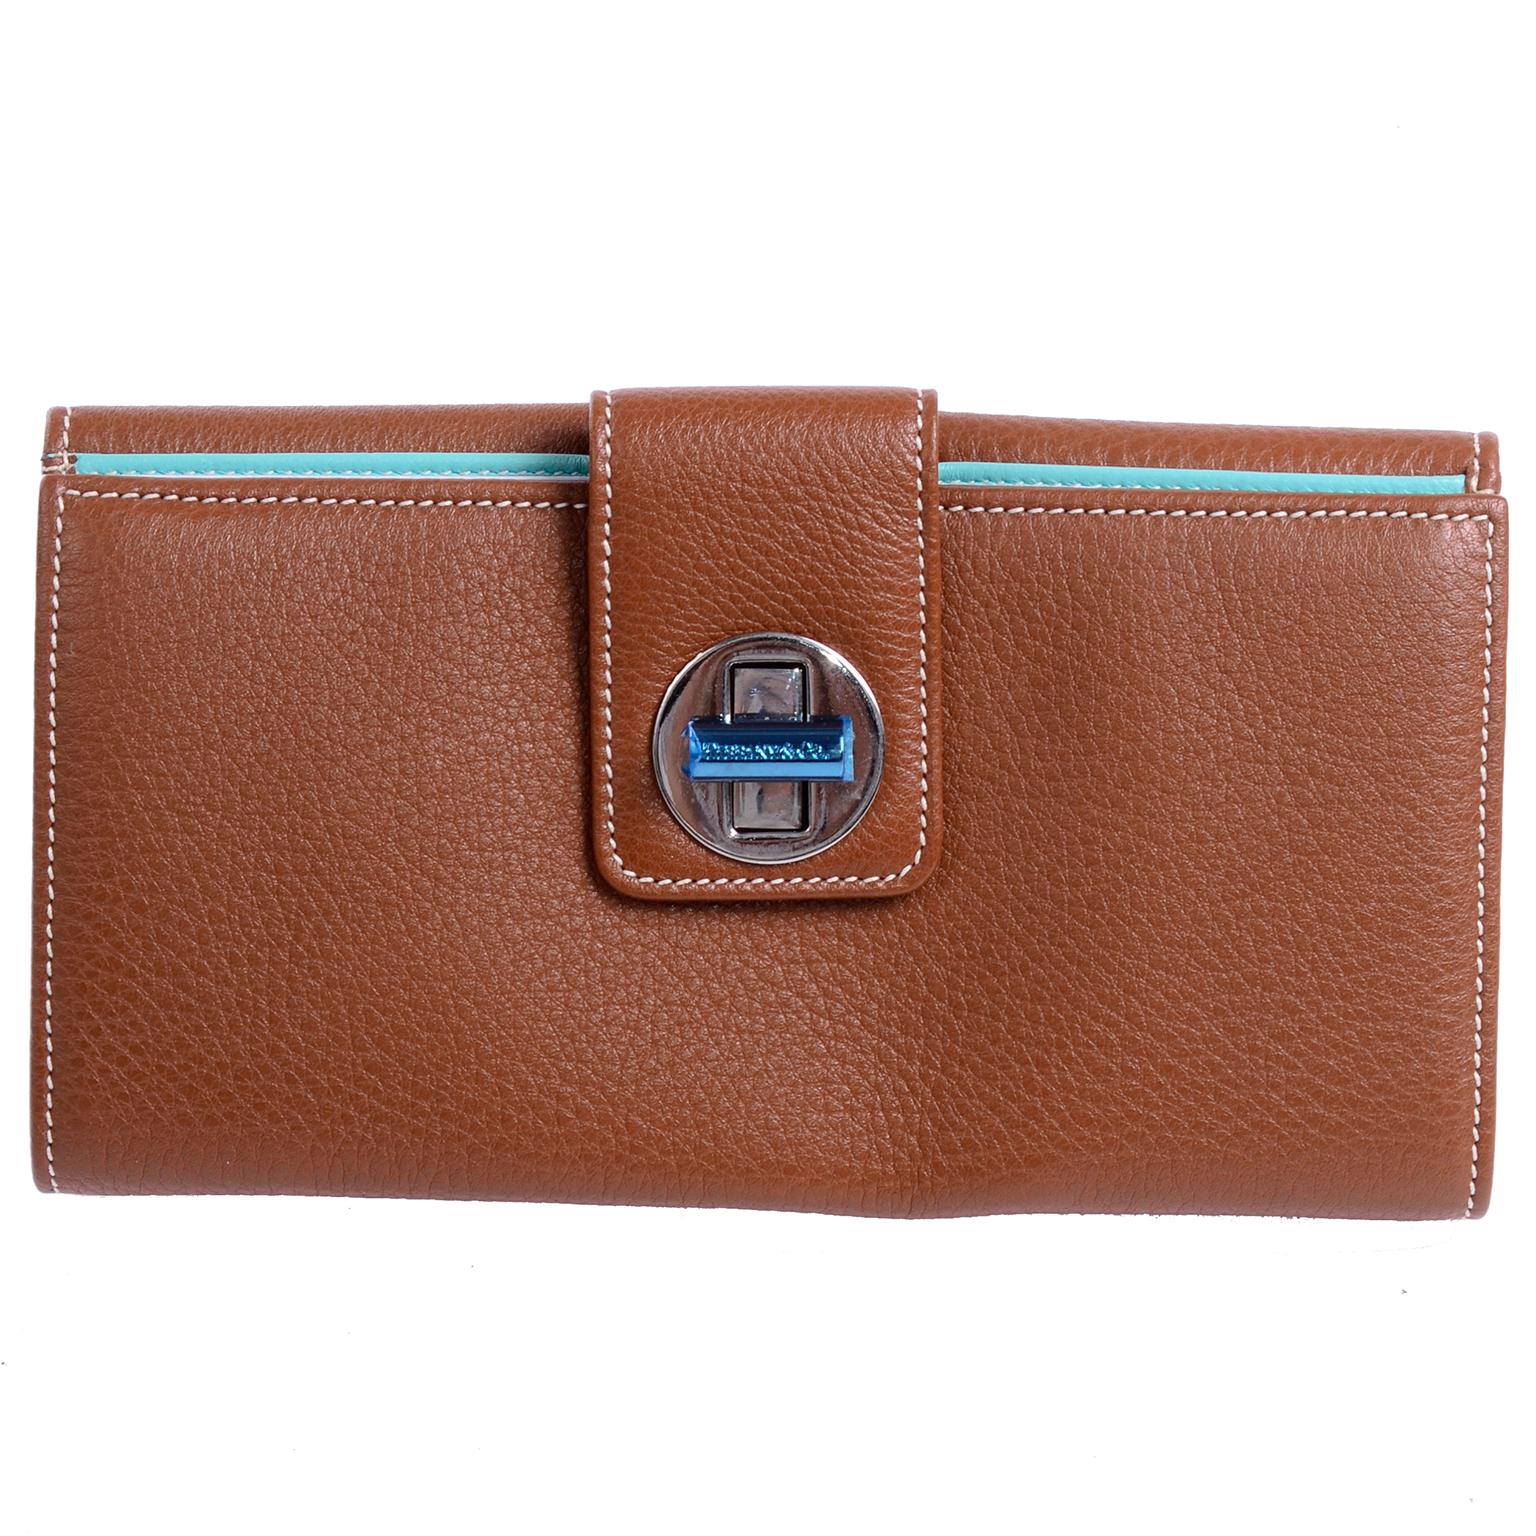 This lovely new Tiffany wallet was never used and comes with its original box and dustbag. The brown pebbled leather wallet still has the original blue plastic over the buckle and all of its original packaging so it would make a perfect gift!  The